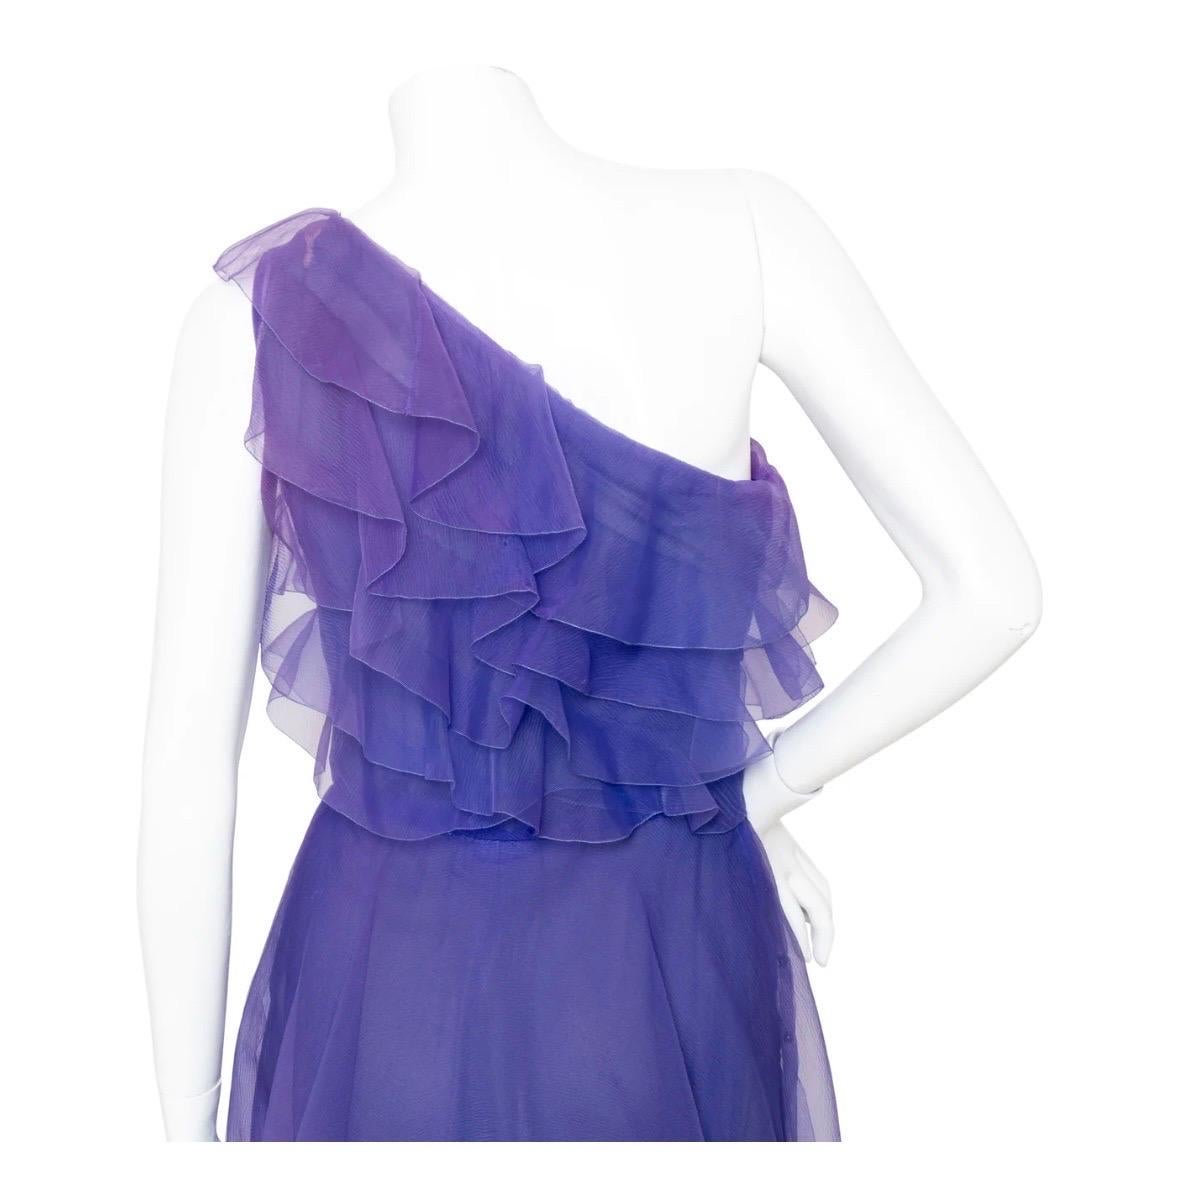 Christian Dior Haute Couture Silk Organza AW 1972 Gown In Good Condition For Sale In Los Angeles, CA